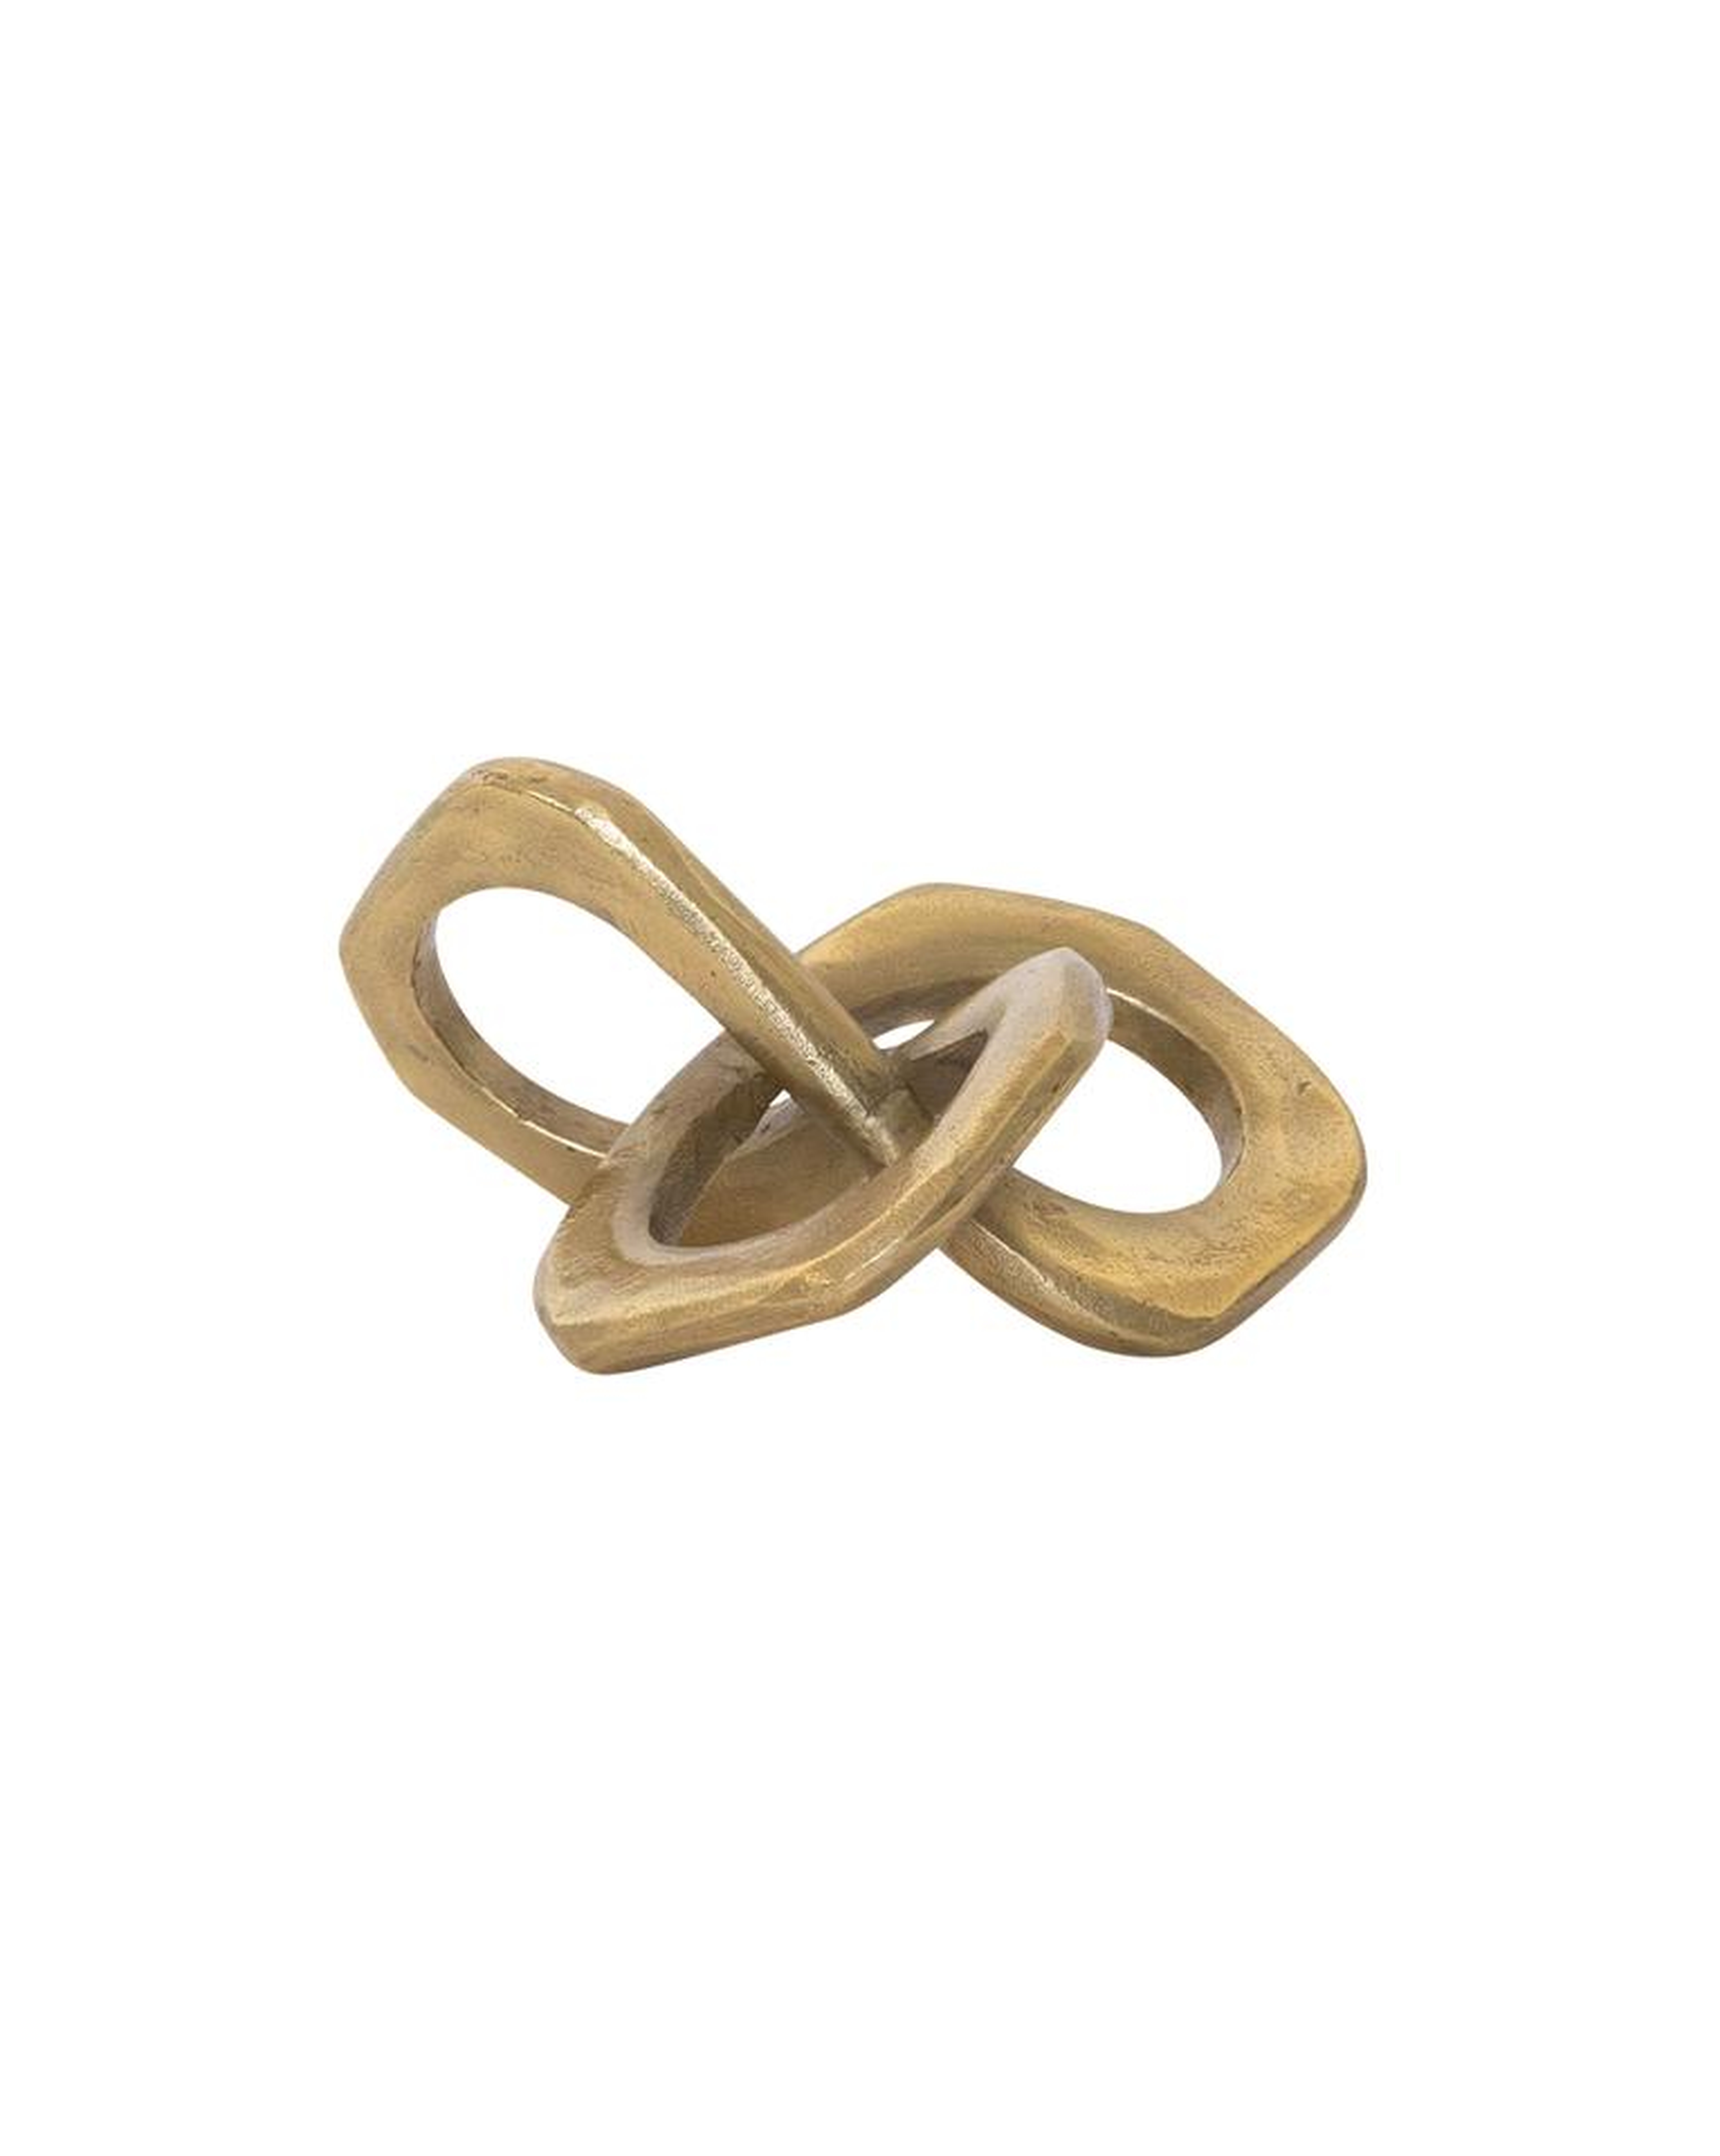 GILDED KNOT OBJECT - McGee & Co.